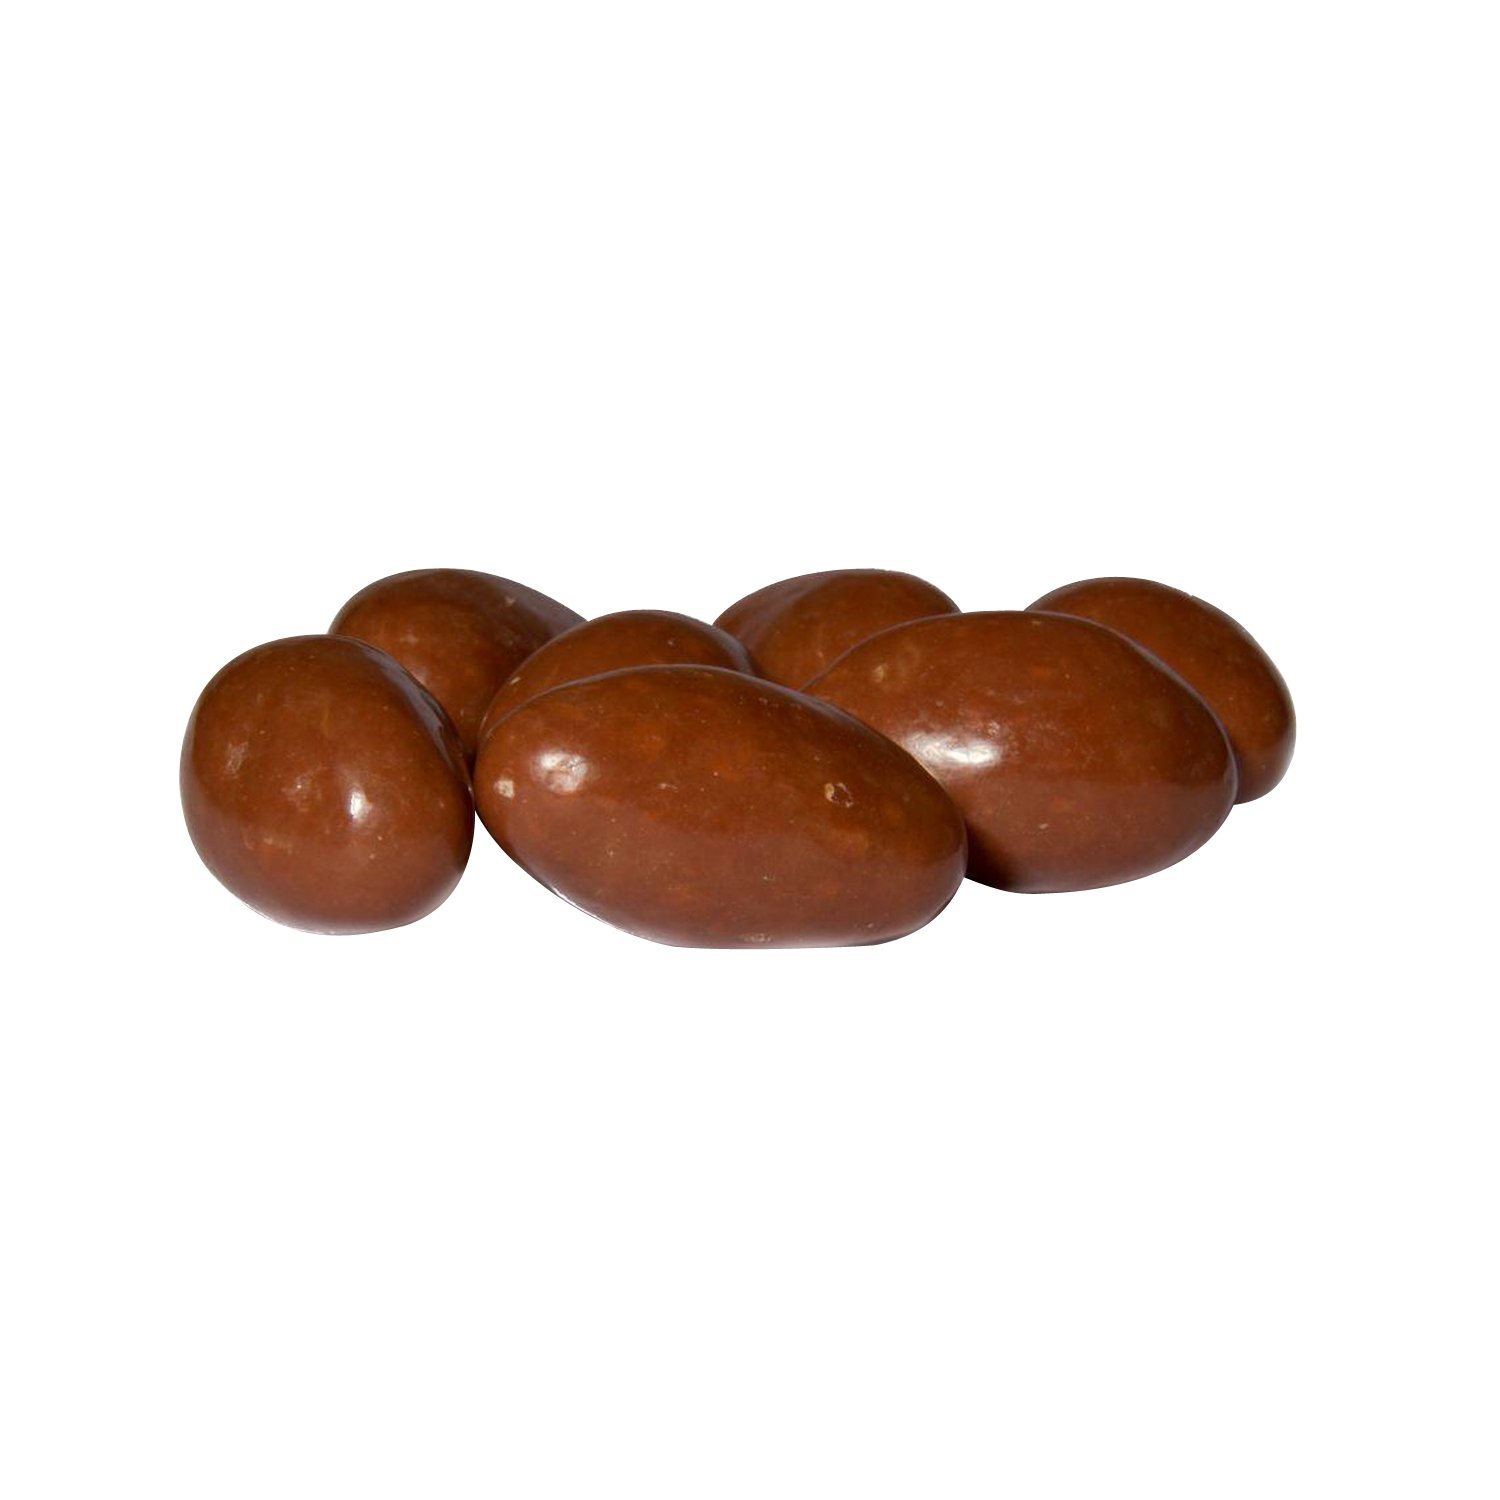 Milk chocolate covered Brazil nuts - 3kg